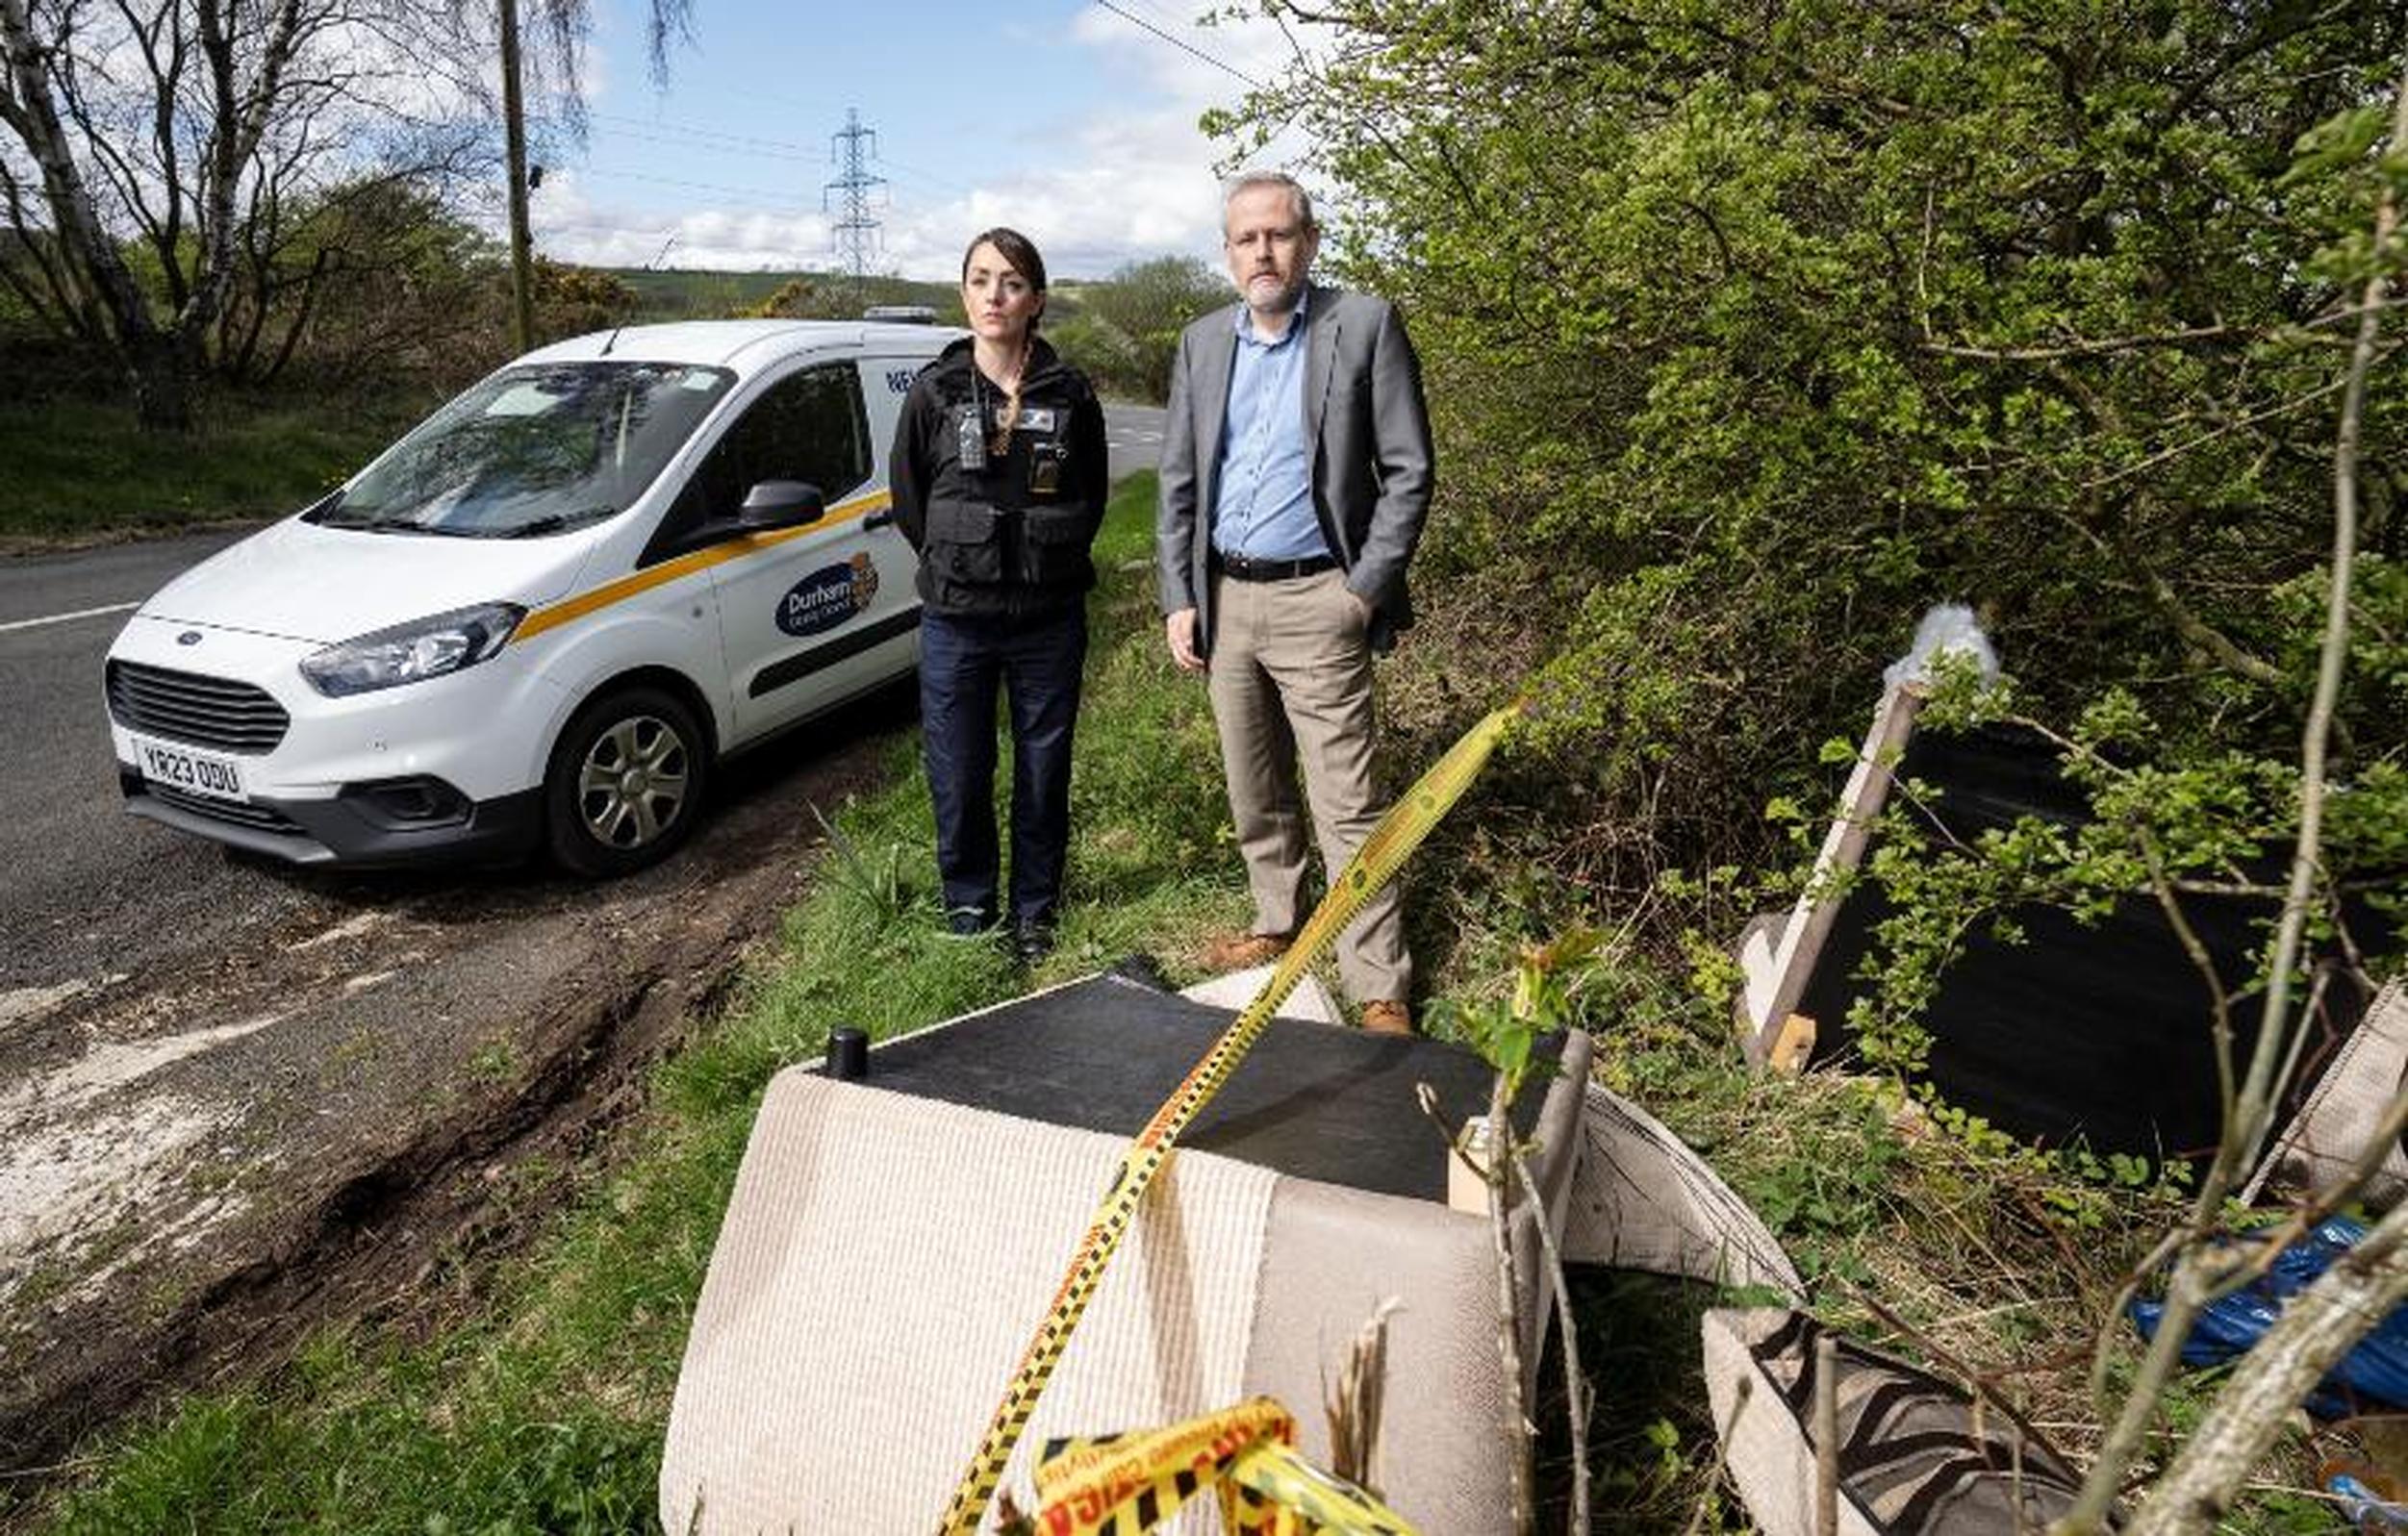 Cllr Mark Wilkes, Durham County Council`s cabinet member for neighbourhoods and climate change, is pictured with neighbourhood warden Claire Liddle at a fly-tip in the Esh area